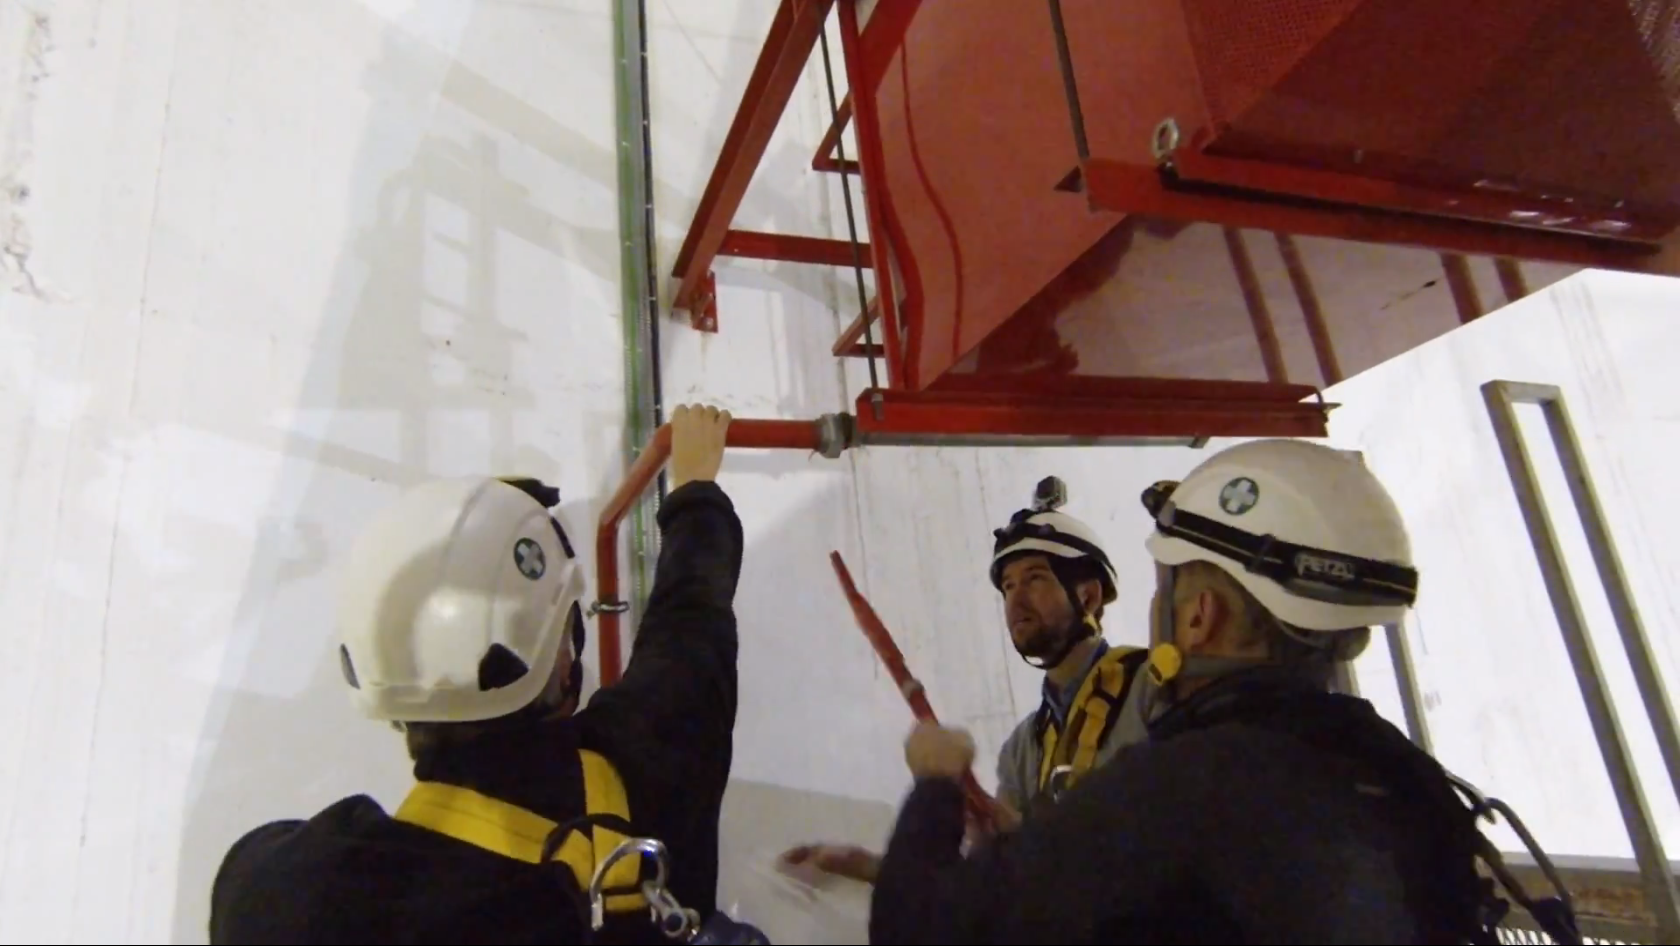 Members of the CMS Safety and Technical Coordination teams removing the foam outlet